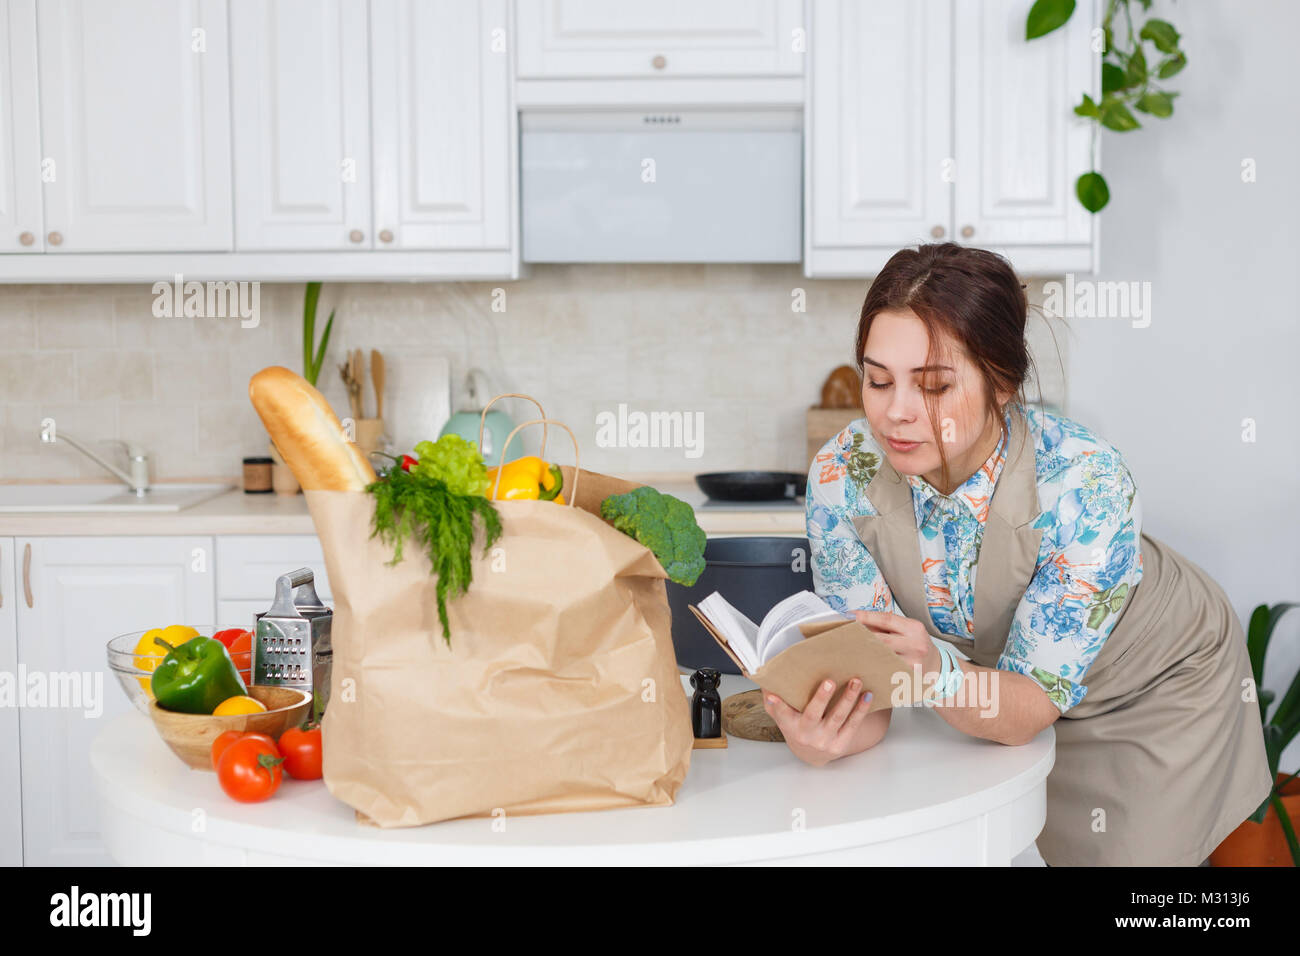 Young housewife with recipes book Stock Photo